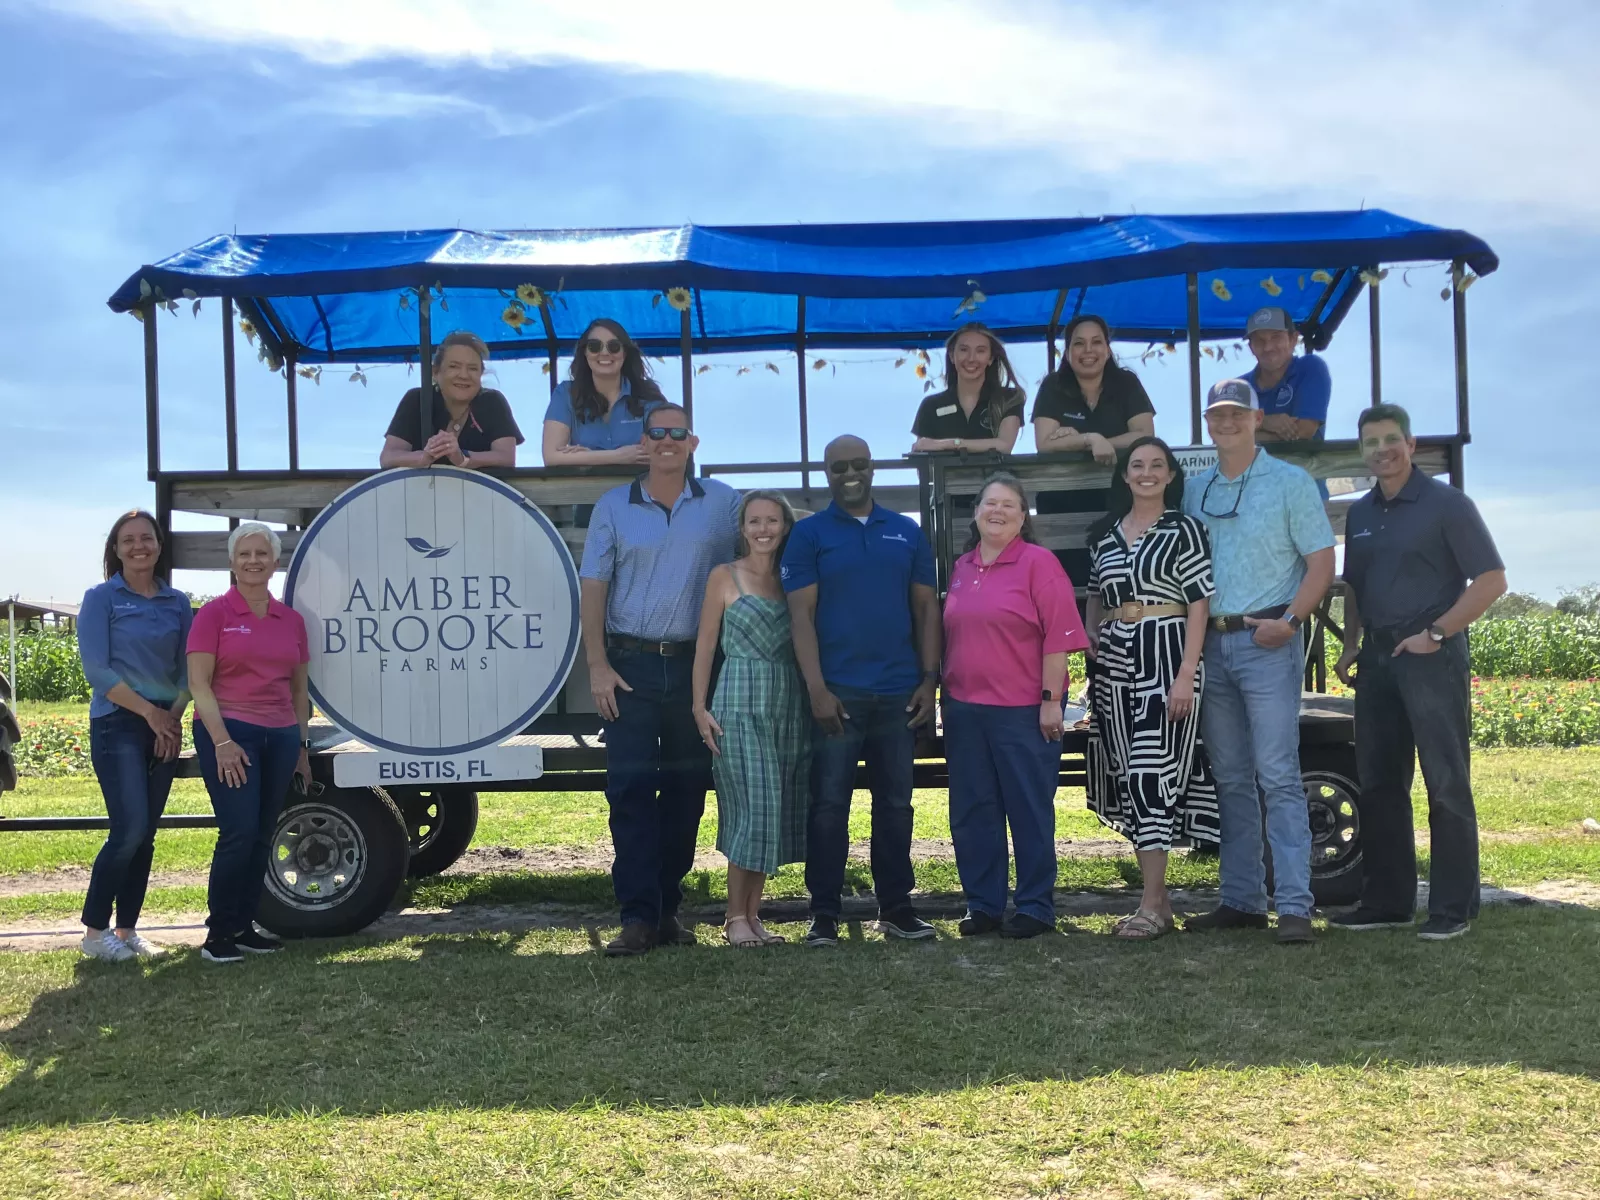 AdventHealth Waterman leaders celebrate partnership with Amber Brooke Farms.